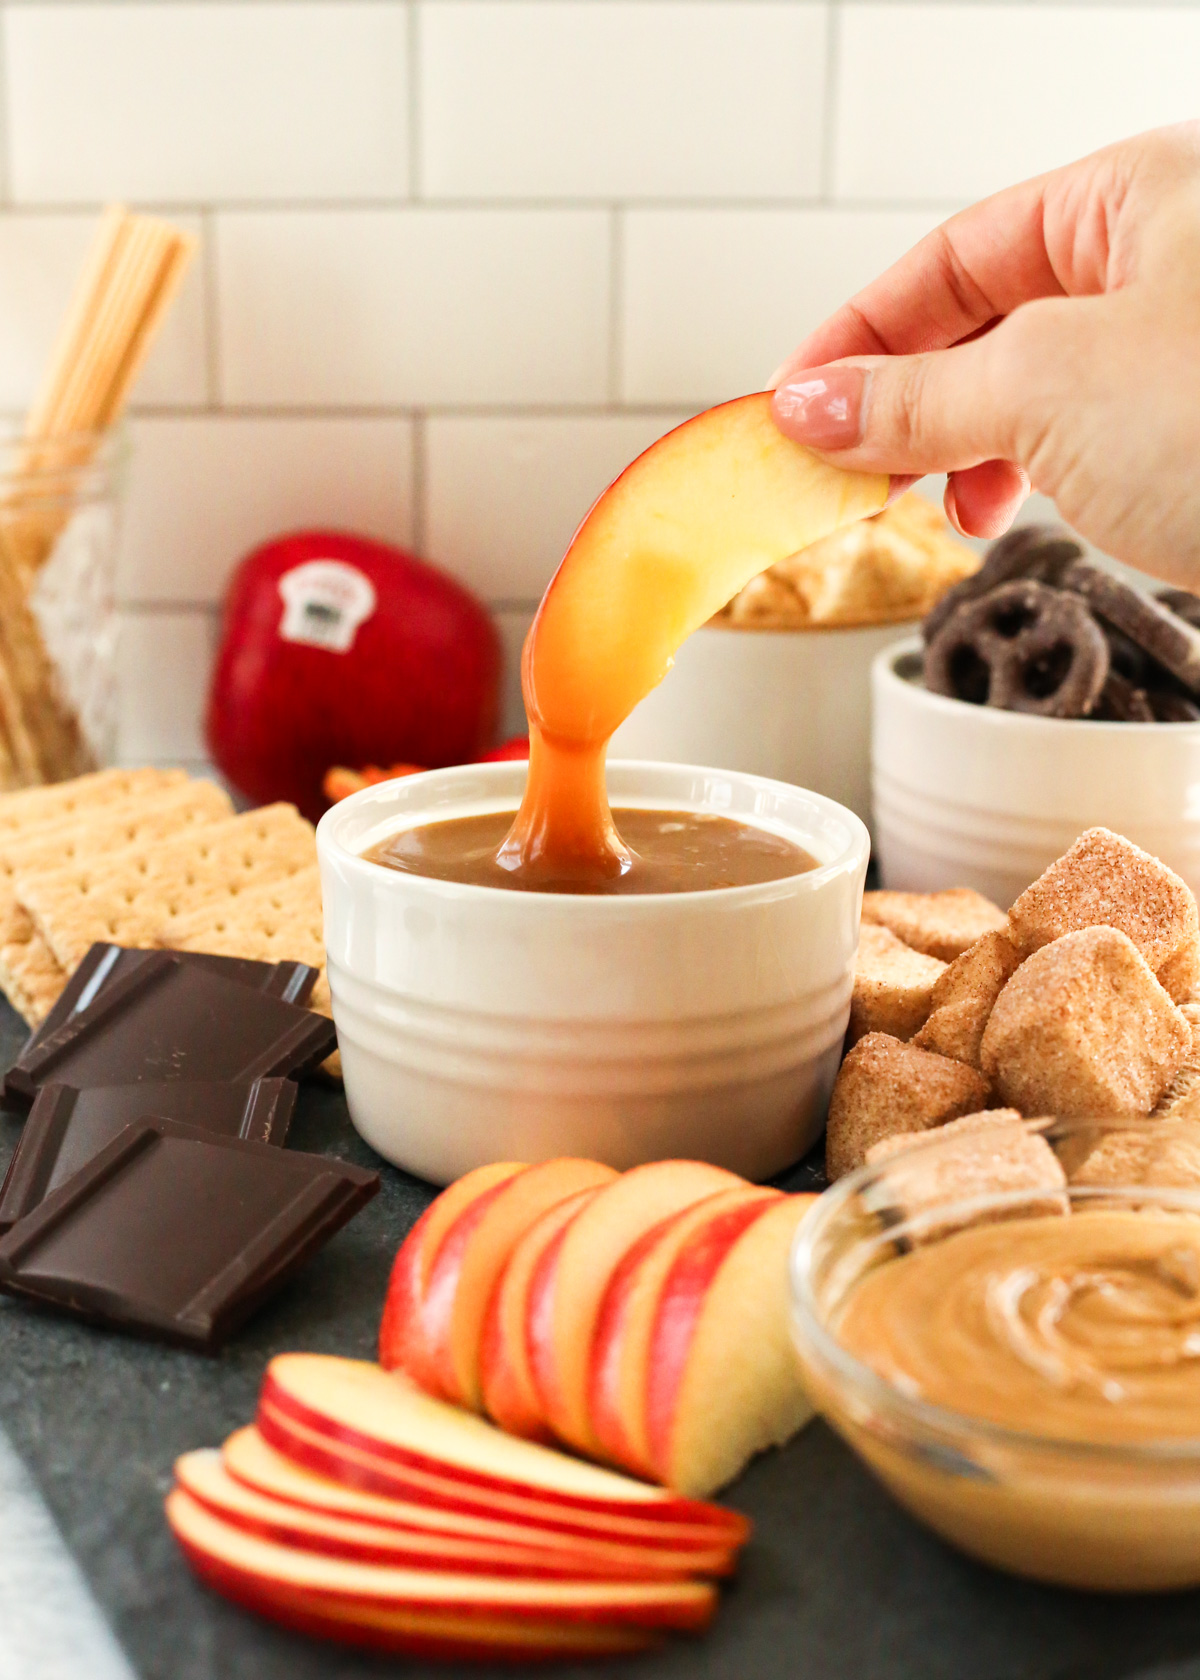 A woman's hand dips an apple slice into a small ramekin full of caramel sauce, with more apple slices and s'mores ingredients scattered on a dessert board in the background